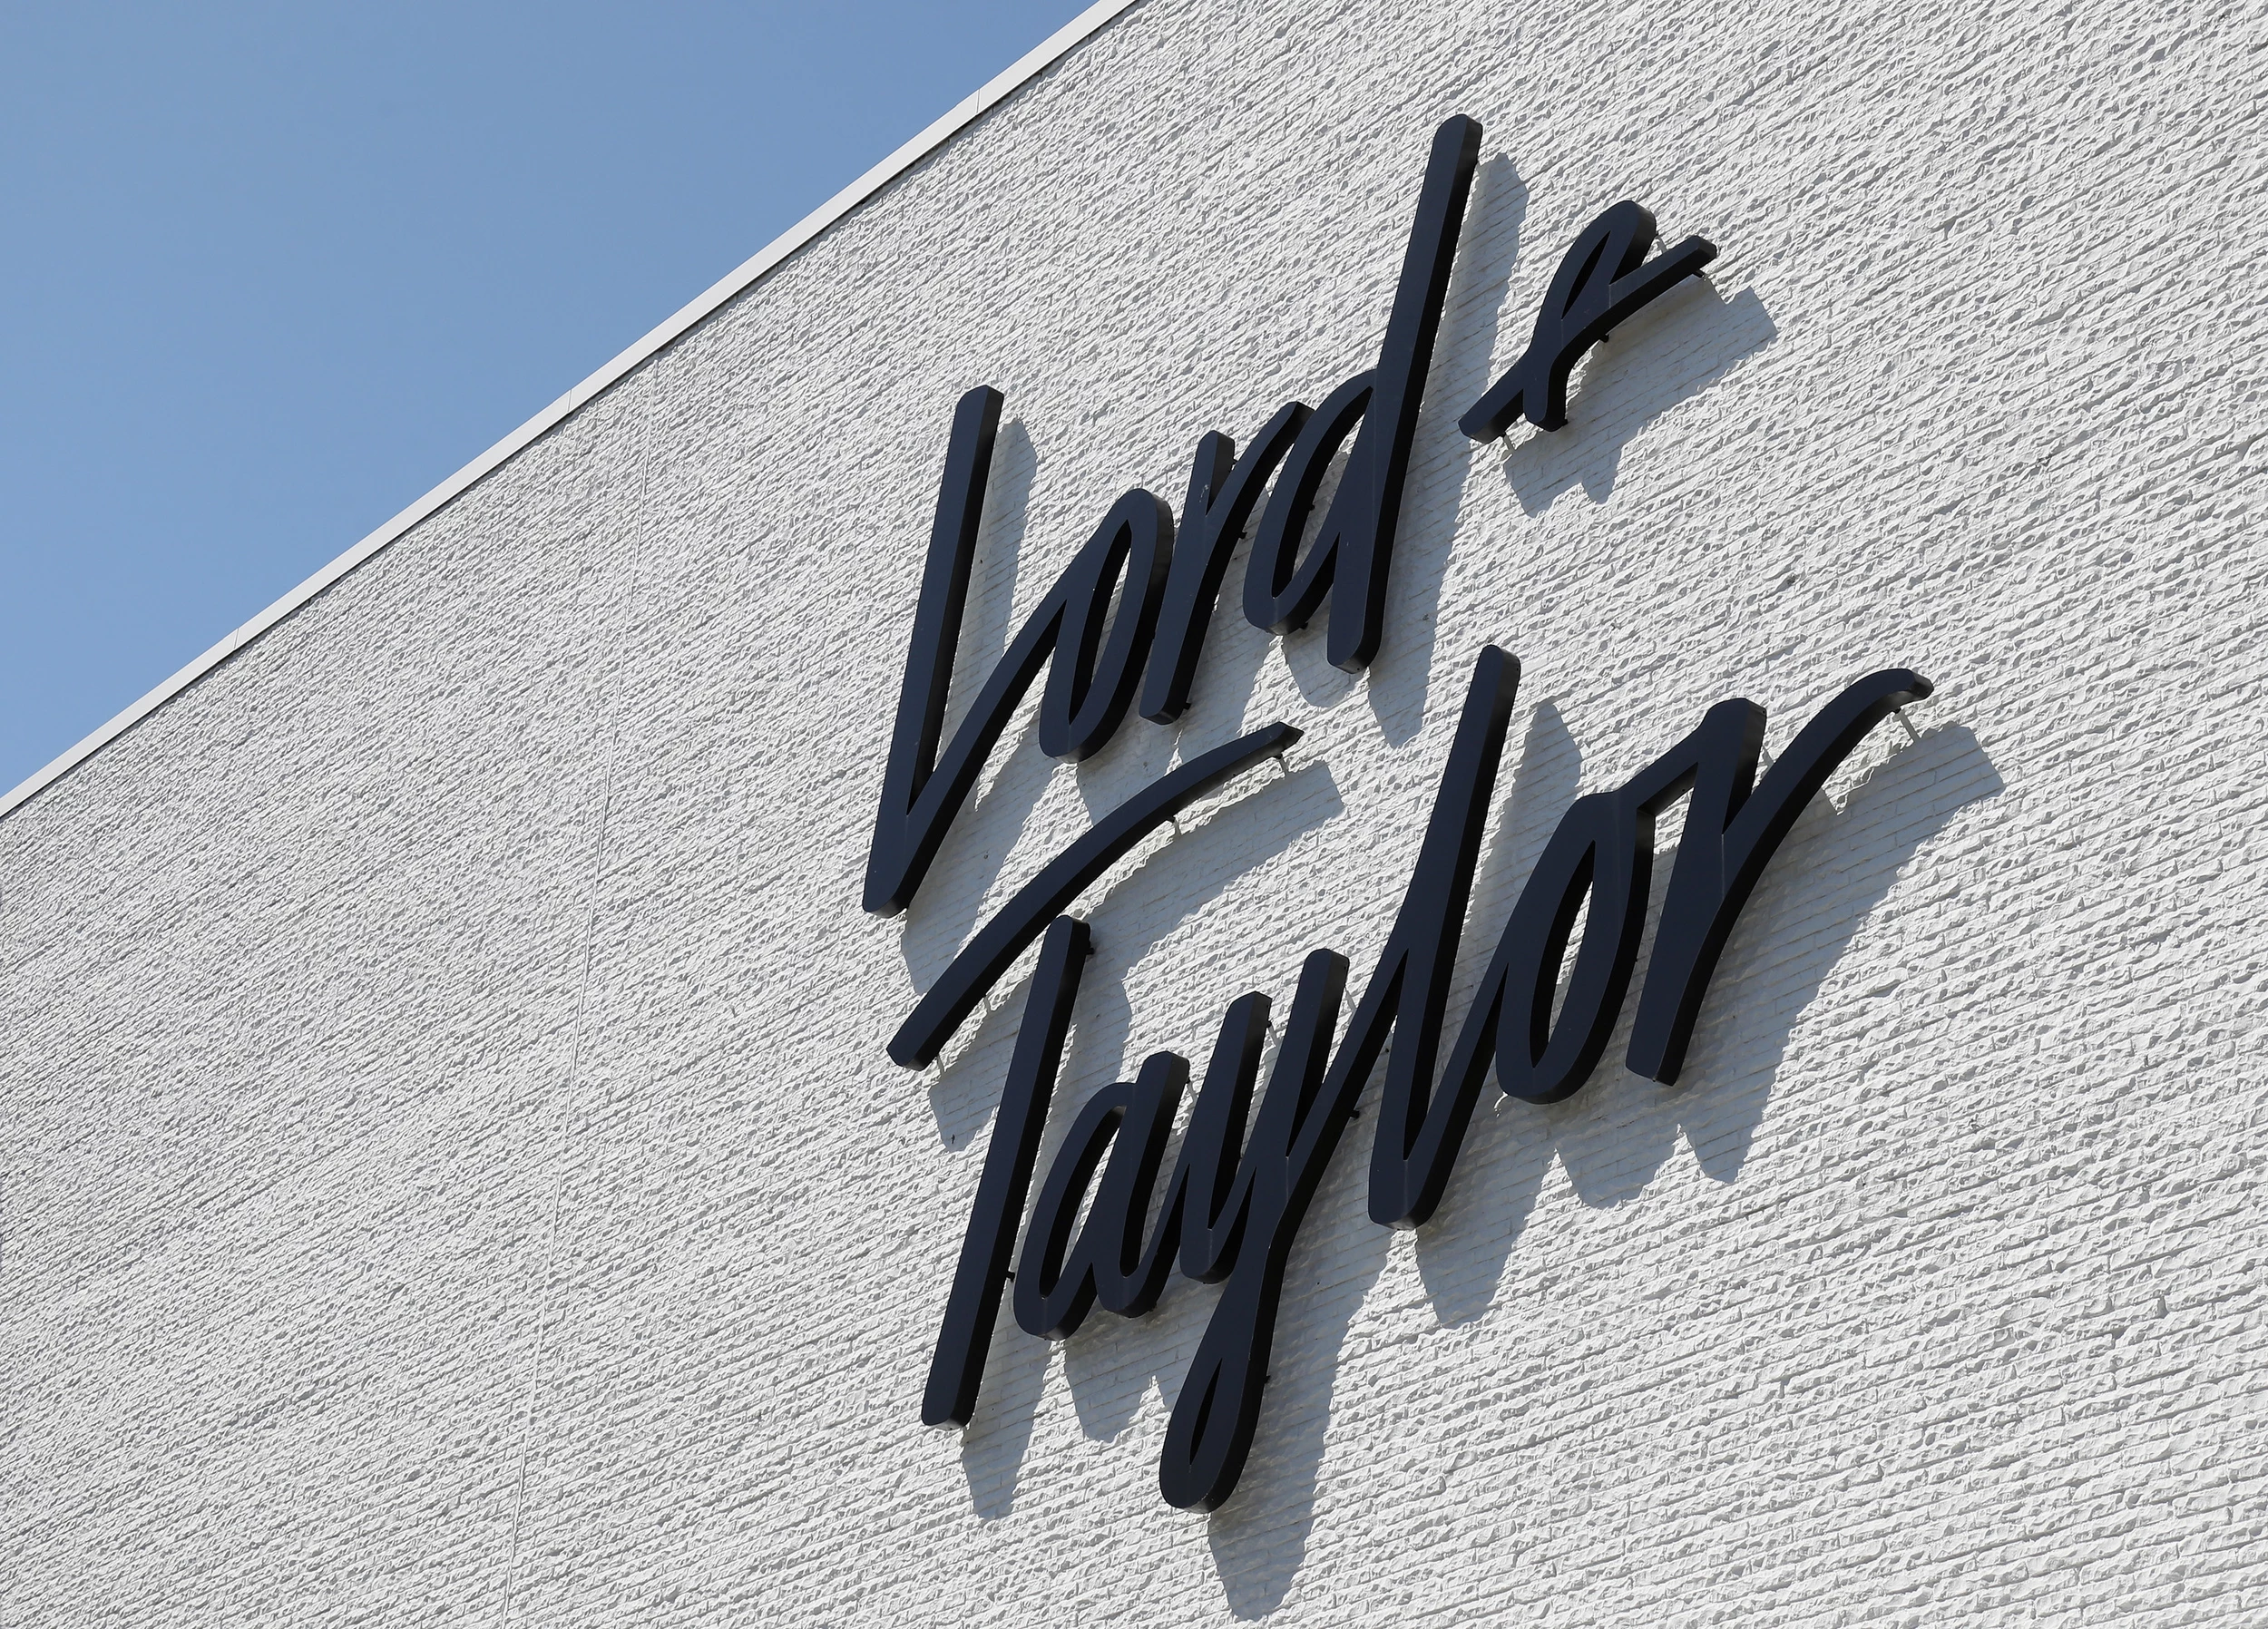 Checking out the new Lord & Taylor at Crossgates